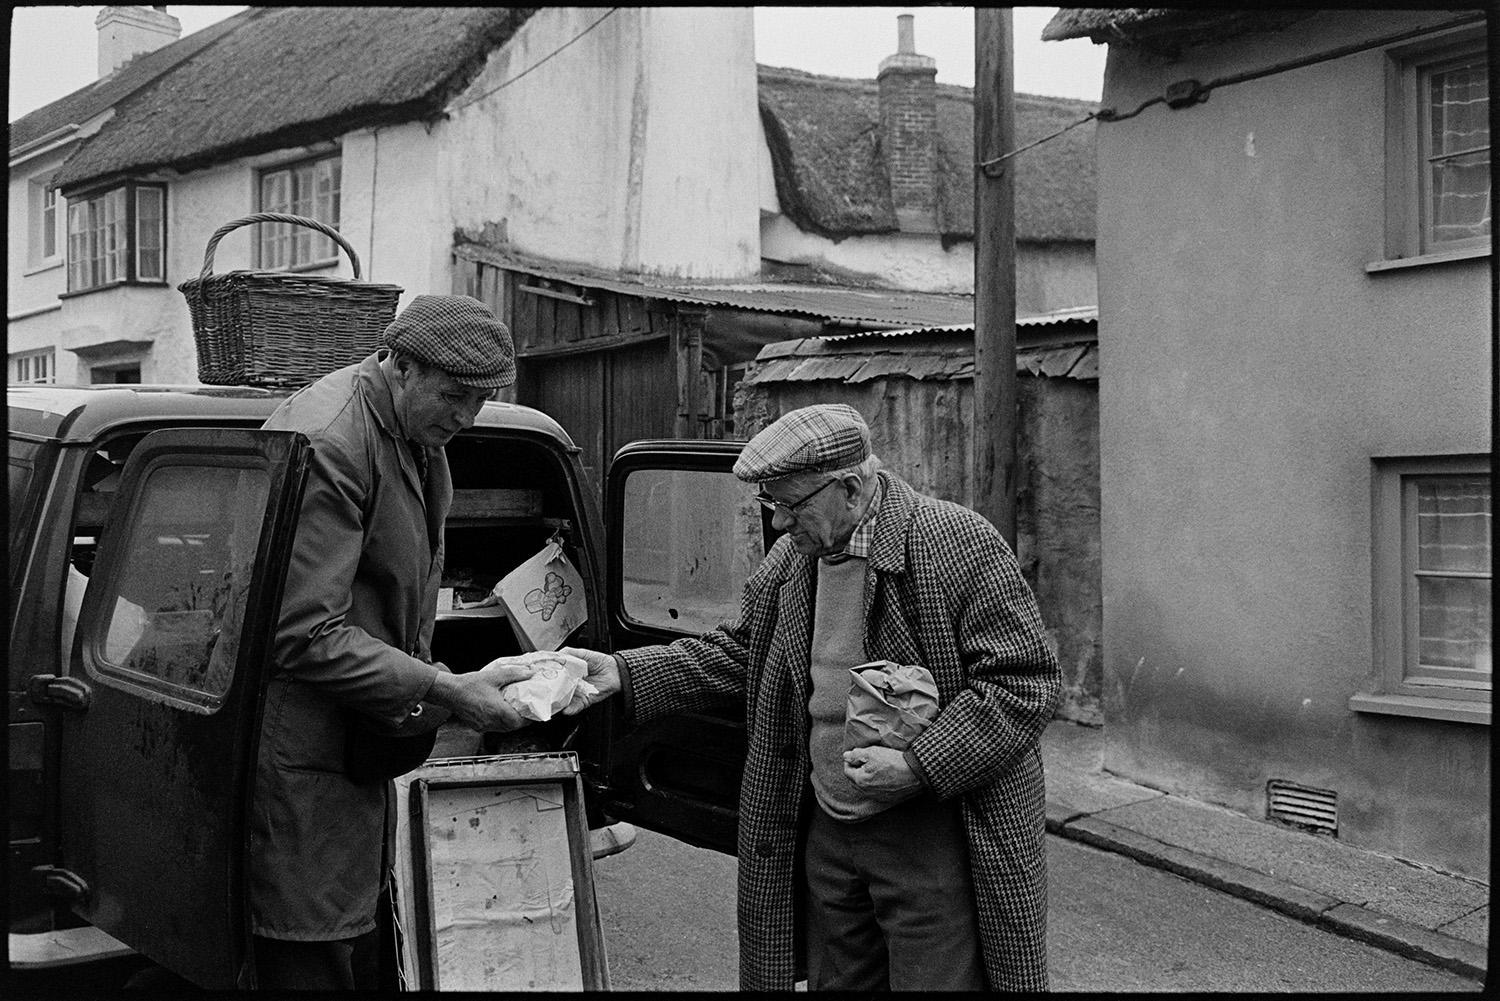 Baker selling bread from van. 
[A man buying bread from a baker's van in a street in Hatherleigh. A basket is on top of the van.]